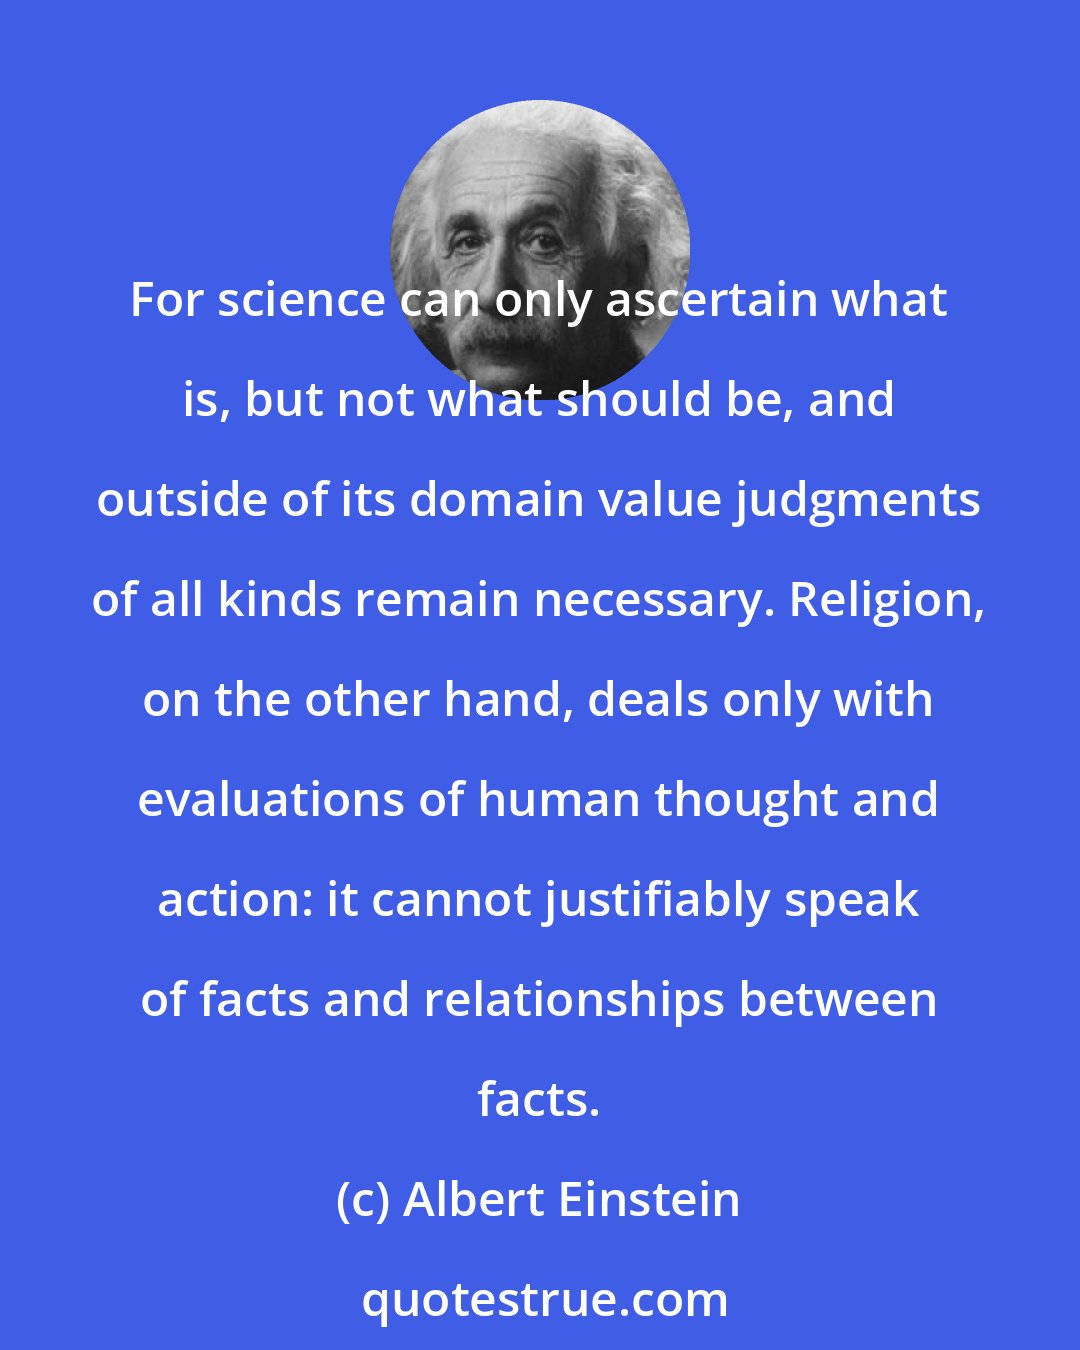 Albert Einstein: For science can only ascertain what is, but not what should be, and outside of its domain value judgments of all kinds remain necessary. Religion, on the other hand, deals only with evaluations of human thought and action: it cannot justifiably speak of facts and relationships between facts.